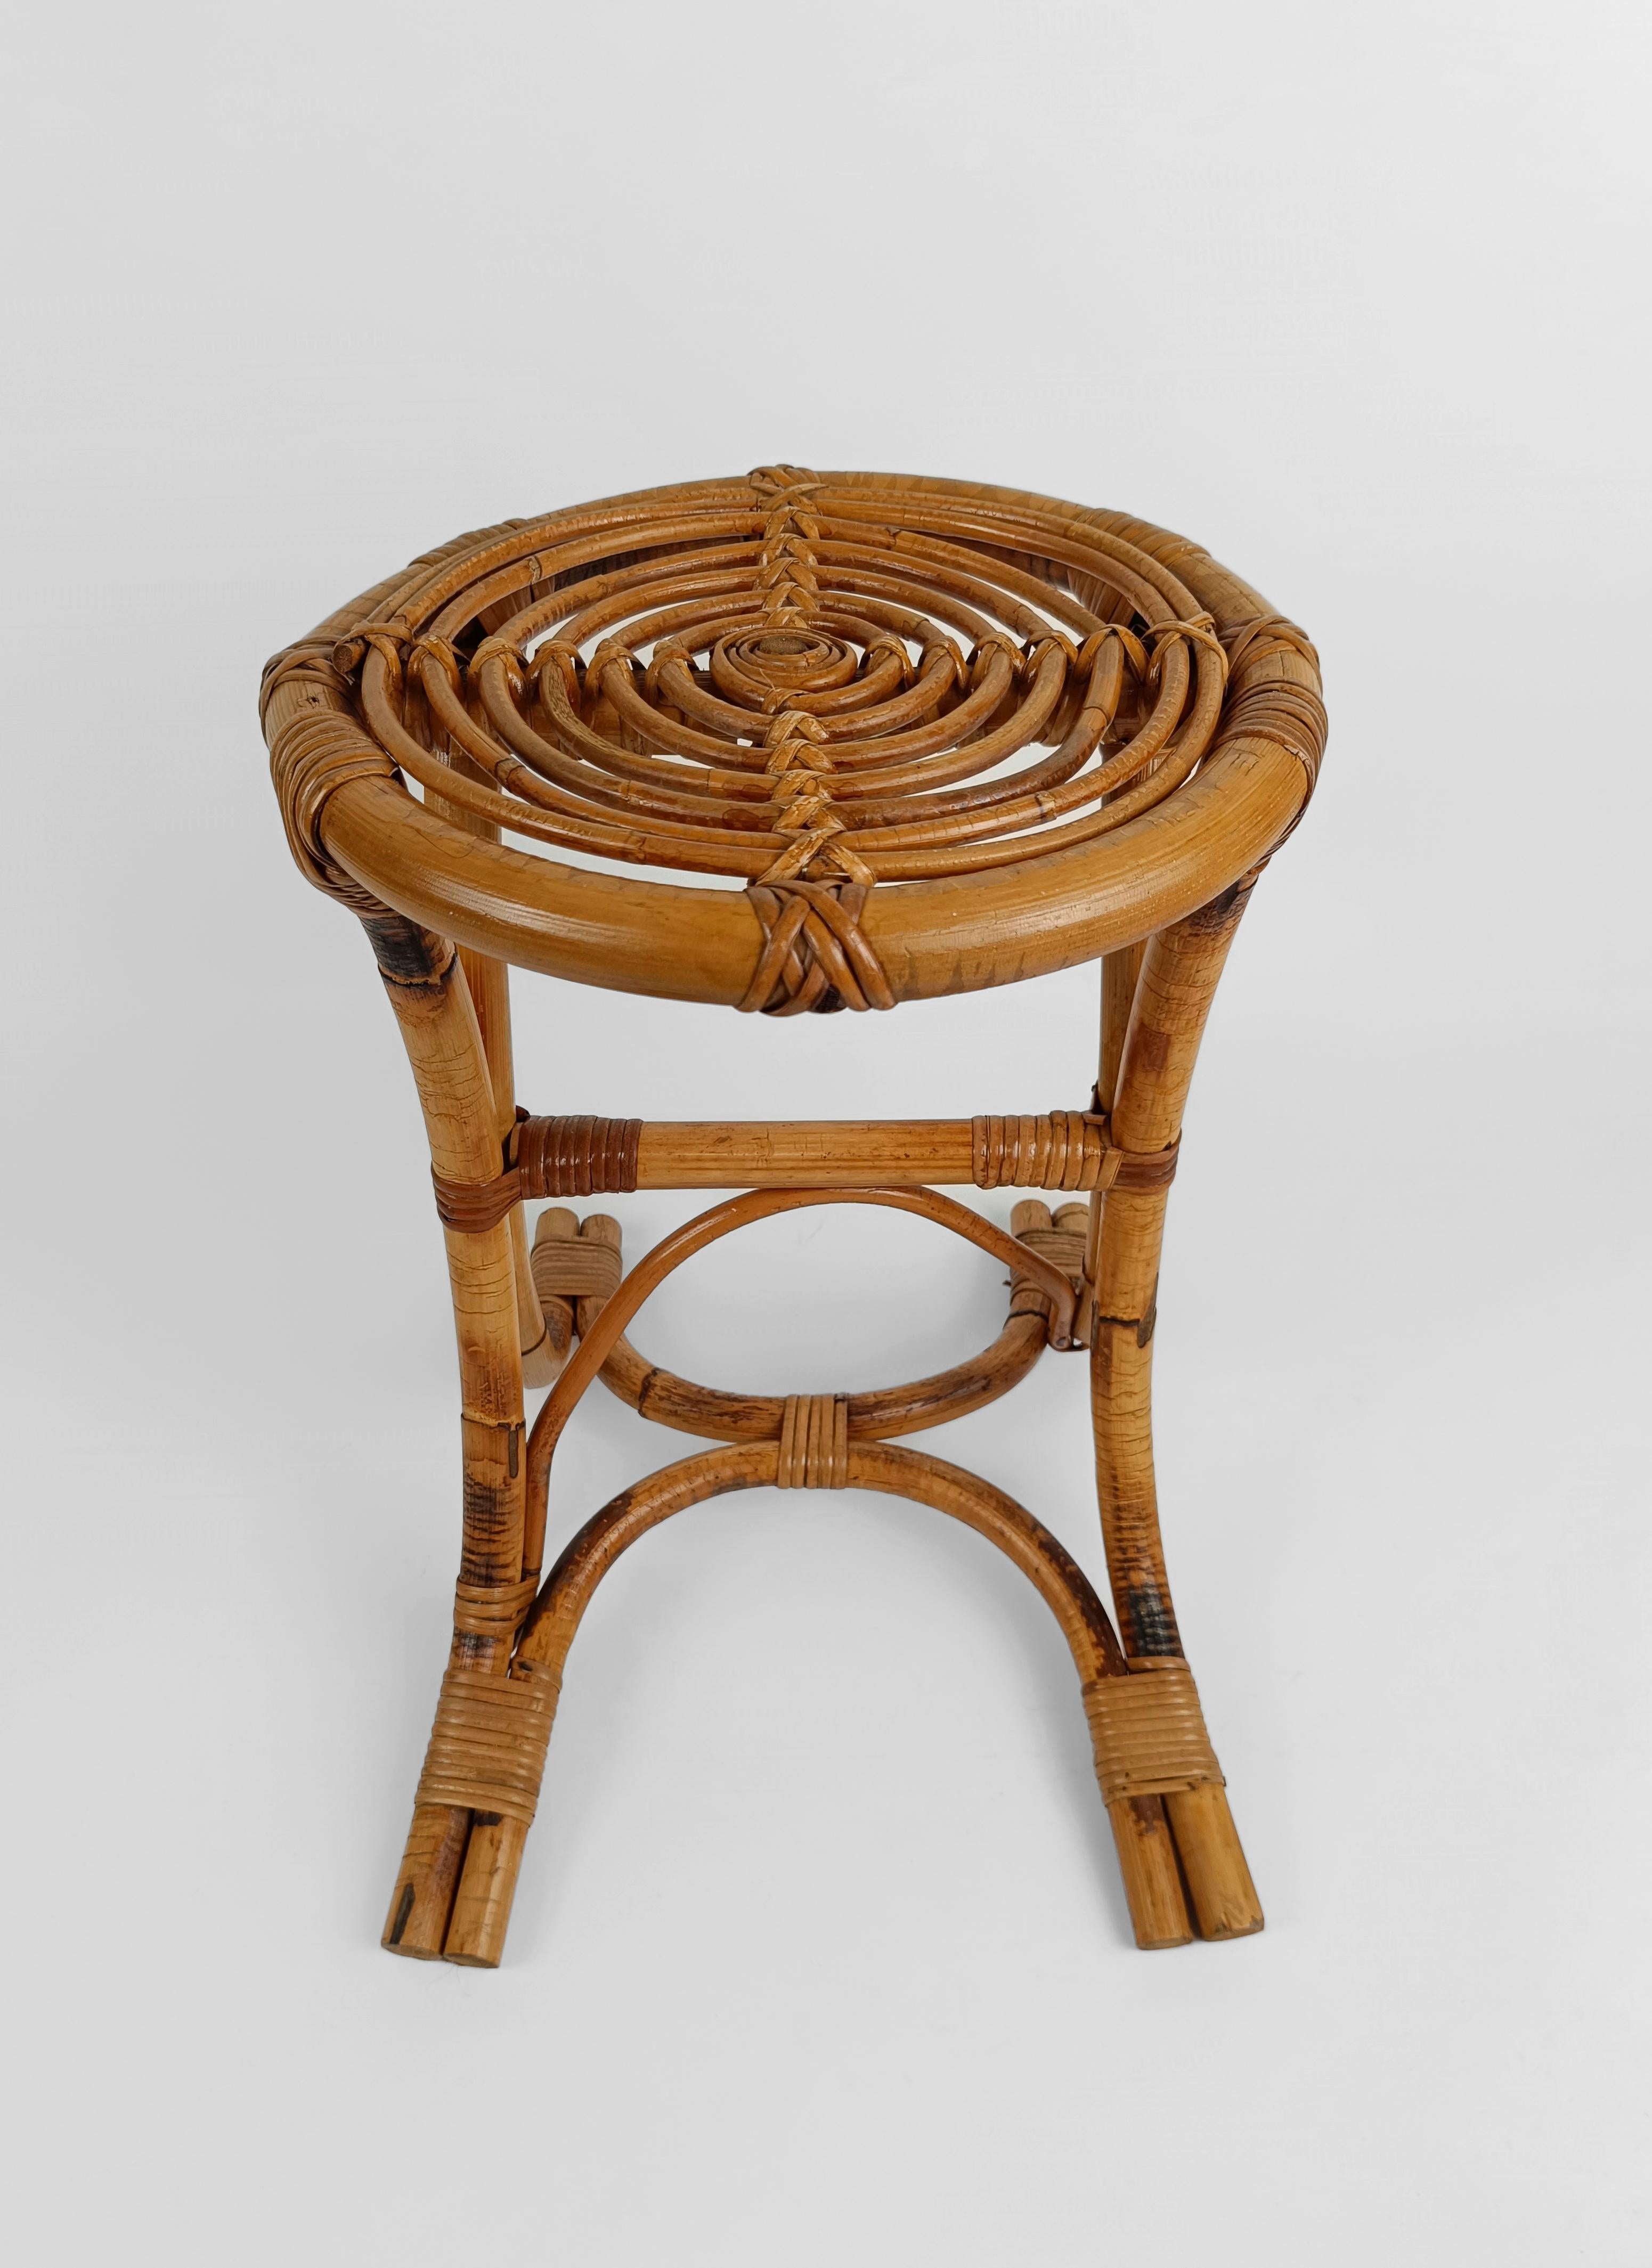 Italian Mid-Century Modern Bamboo Rattan and Cane Stool, 1960s  For Sale 2